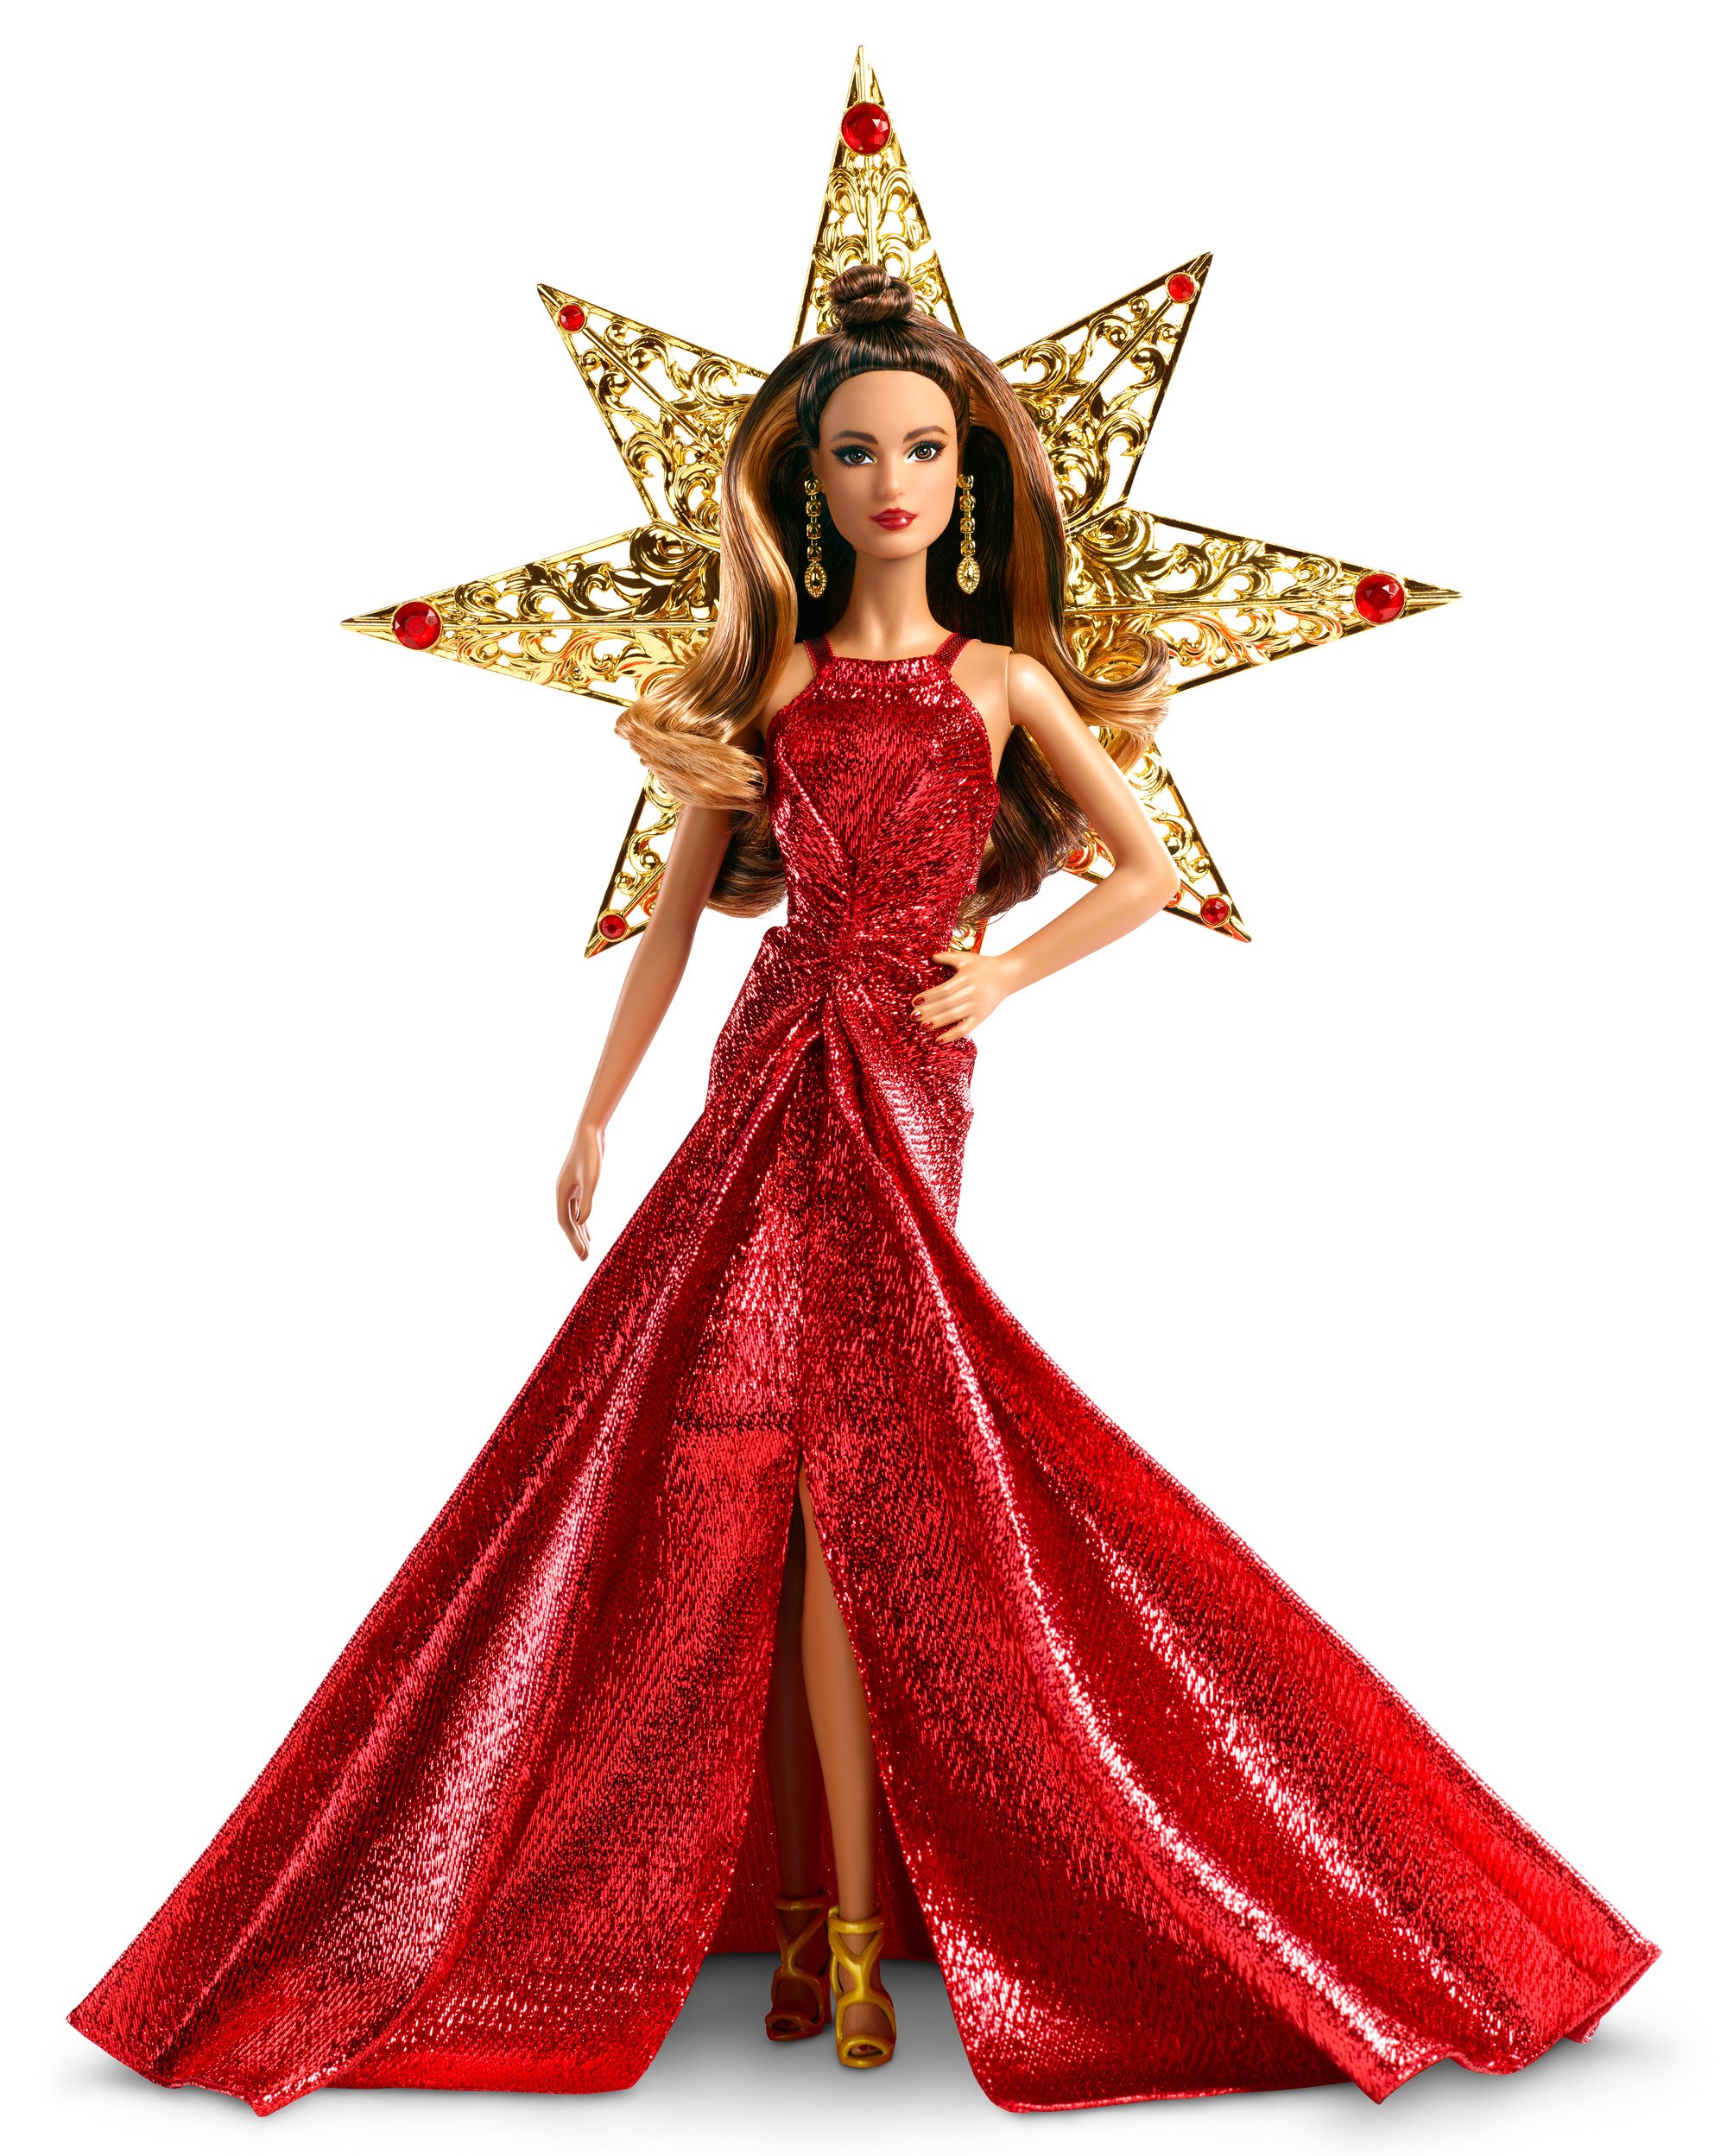 when was the first holiday barbie made